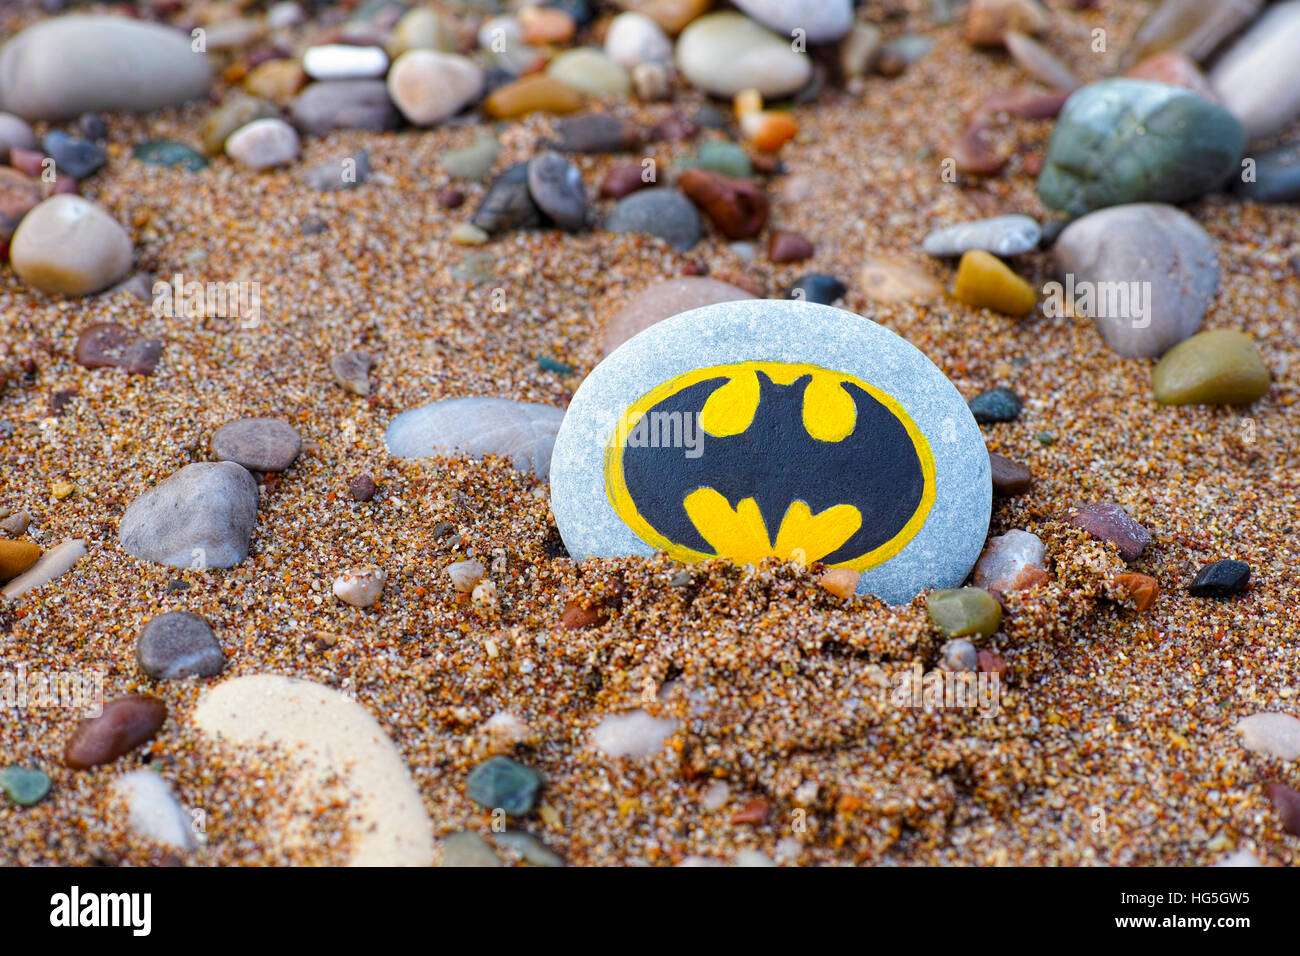 Paphos, Cyprus - November 22, 2016 Pebble with painted sign Batman lying on the beach with sand and stones. Stock Photo